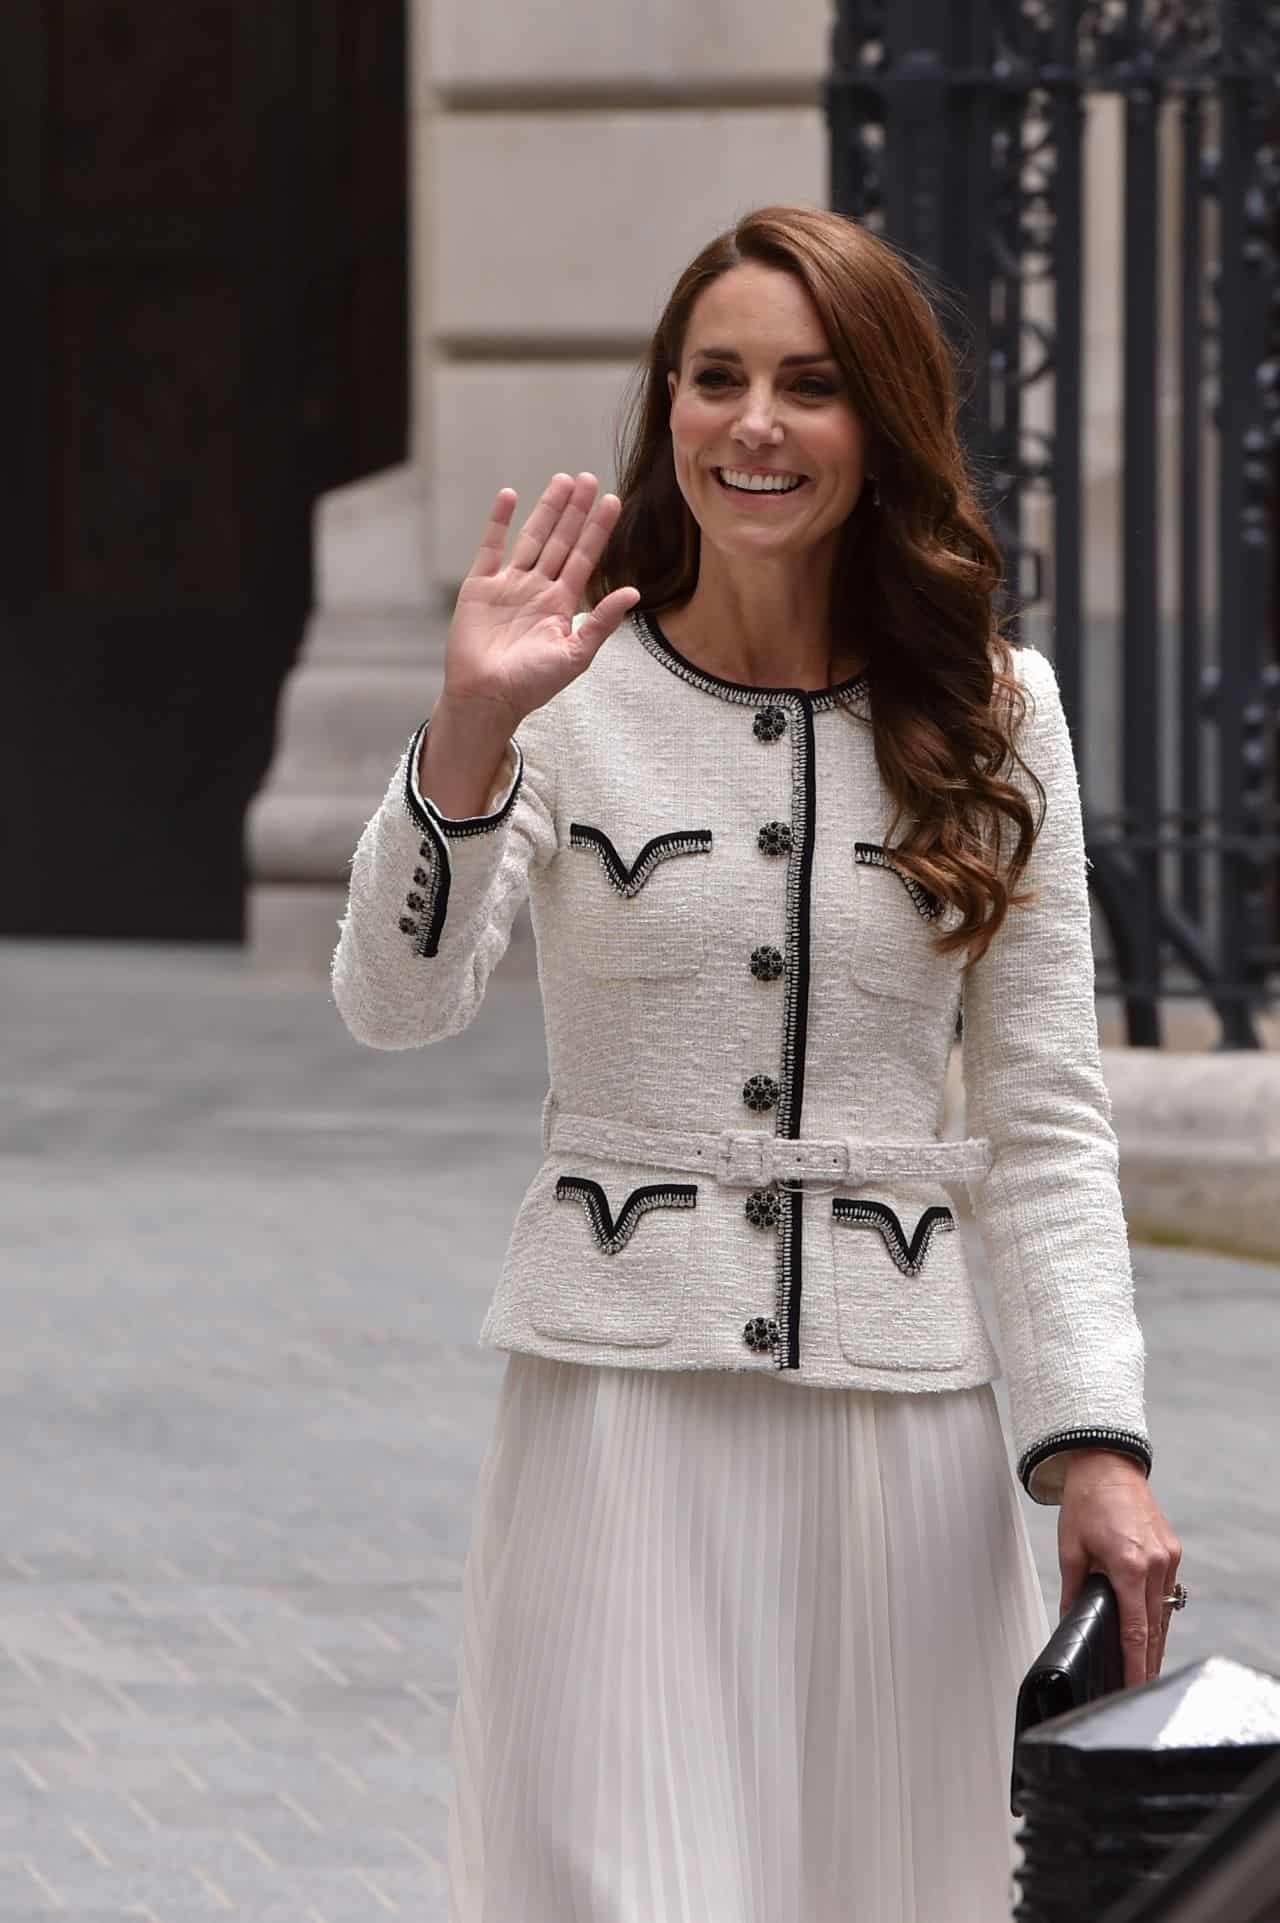 Kate Middleton at the Grand Reopening of the National Portrait Gallery